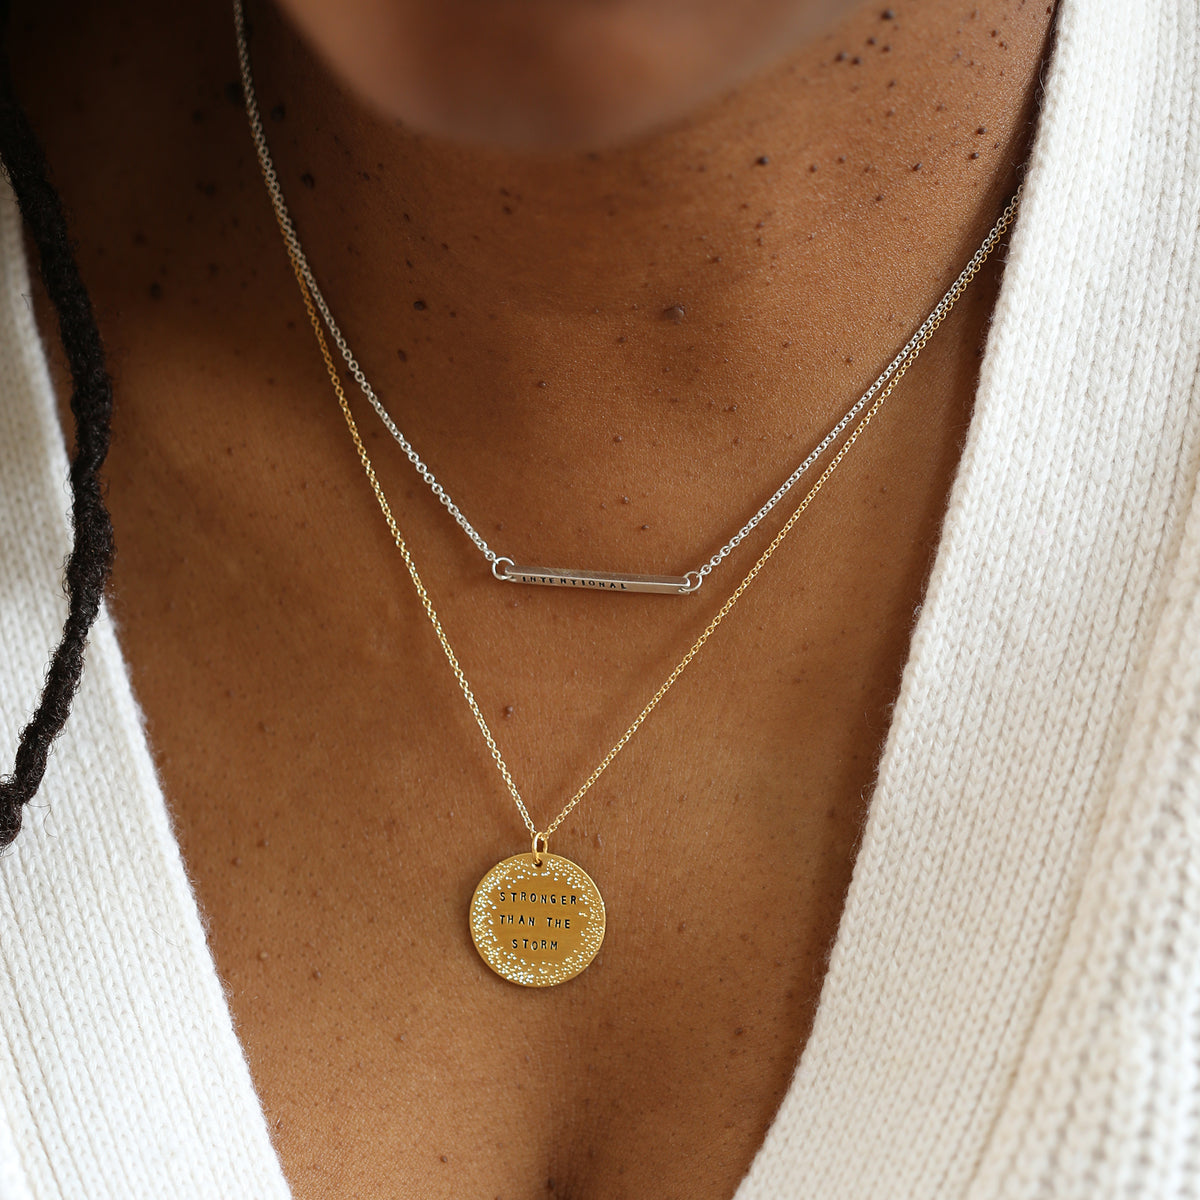 SMALL COIN NECKLACE